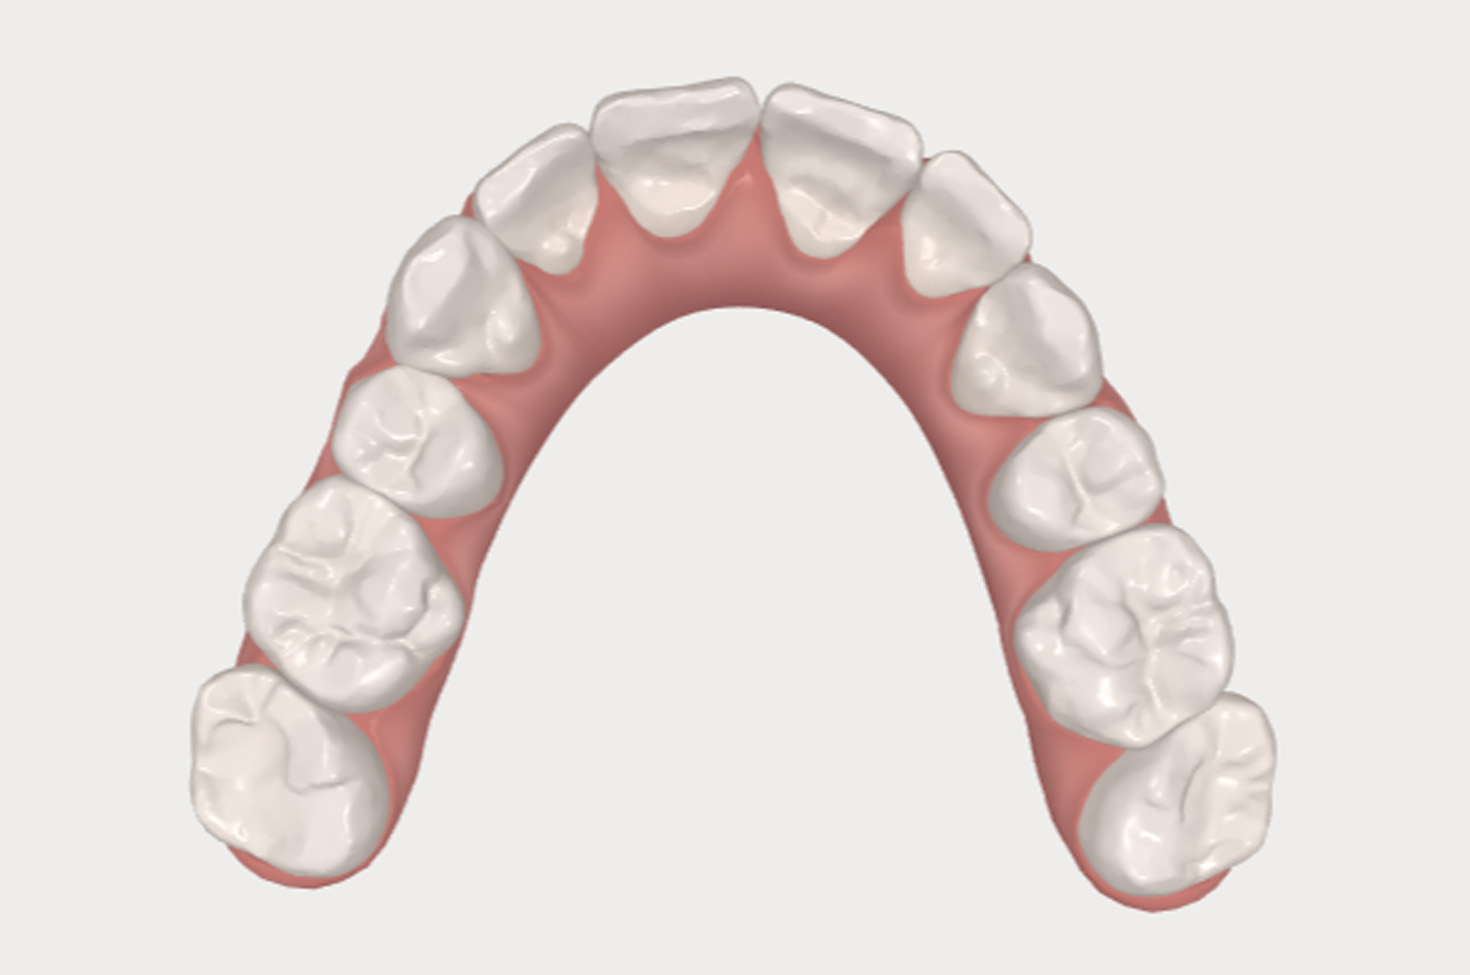 Simulation images of before and after teeth straightening